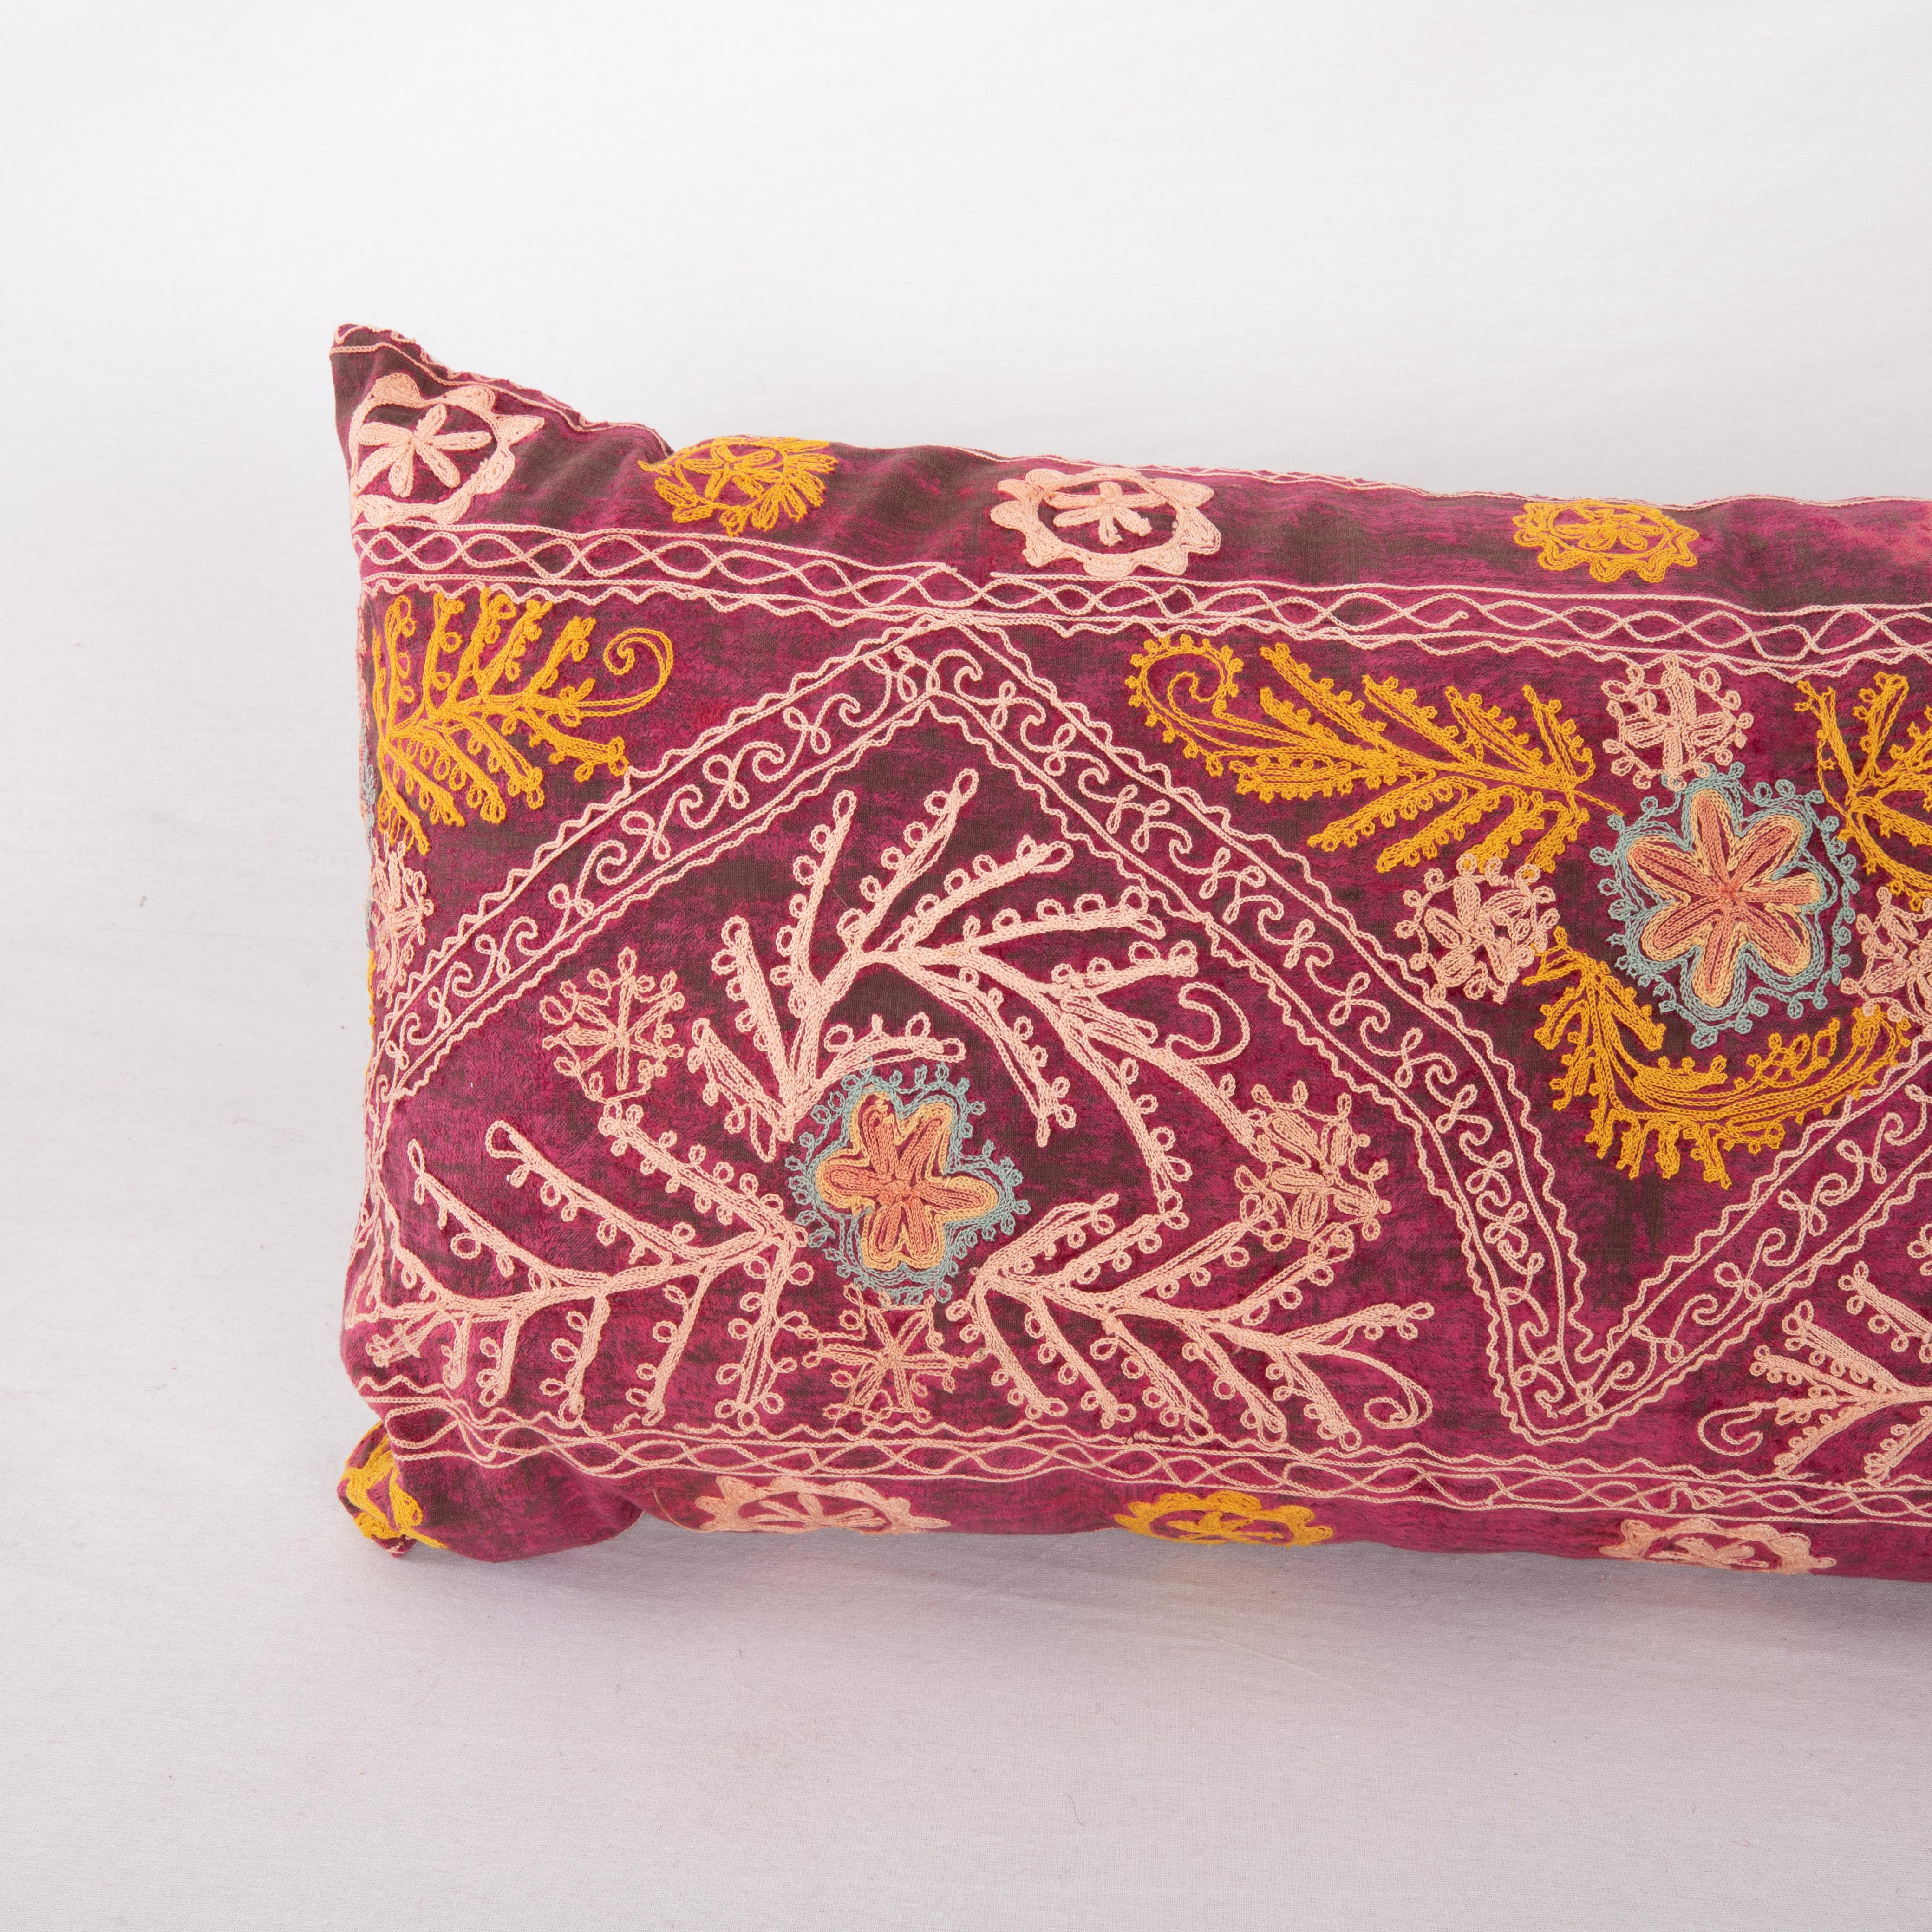 Uzbek Suzani Pillow Case Made from a Vintage Velvet Ground Suzani, Mid-20th Century For Sale